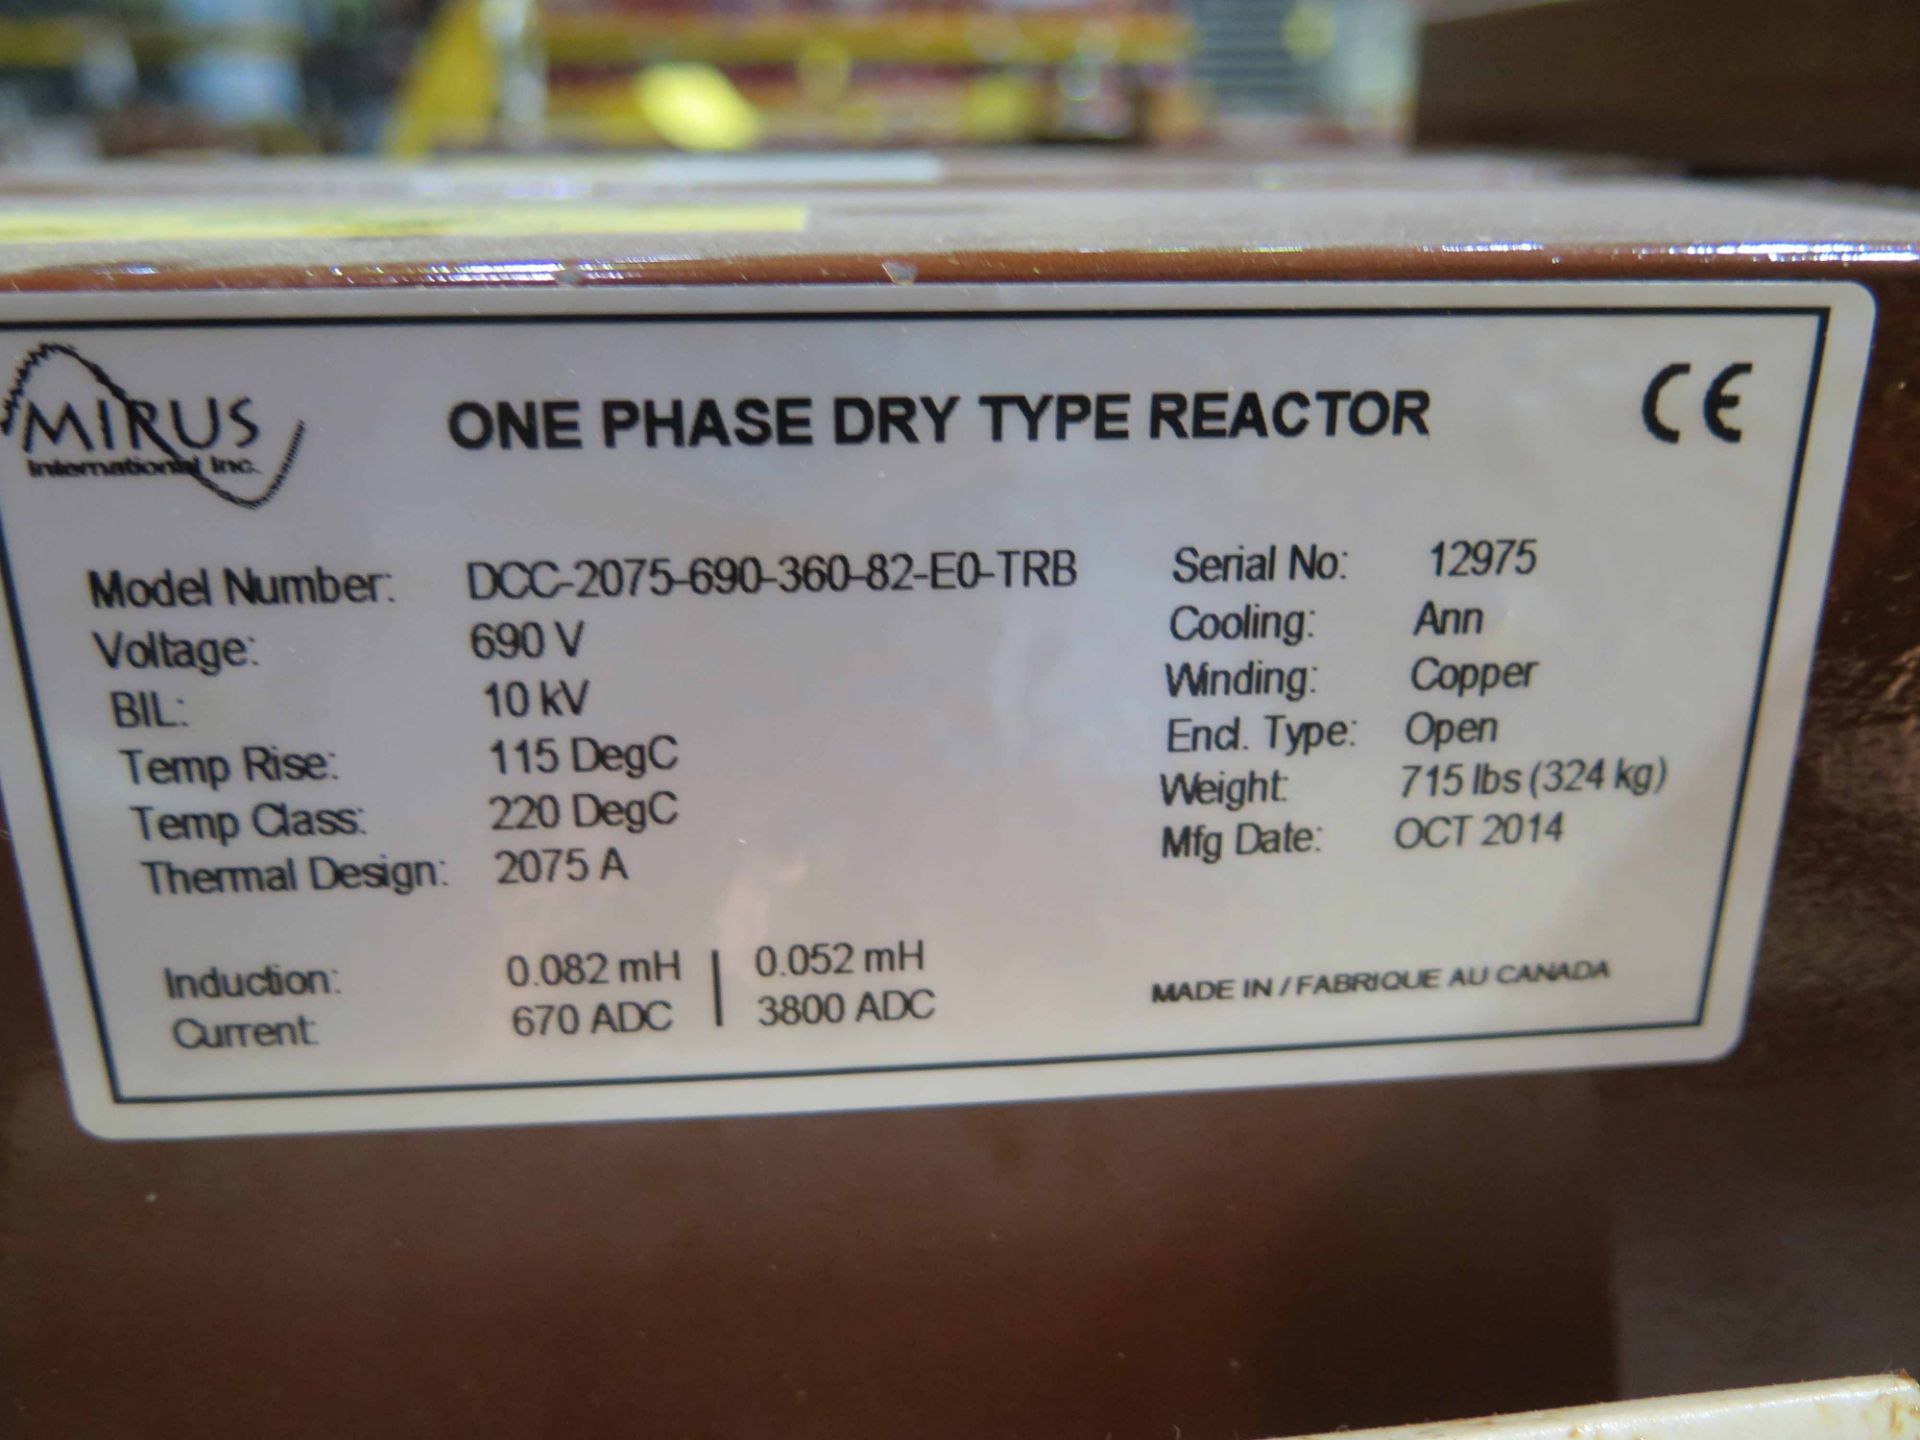 D.C. LINK REACTOR, MIRUS, 600 v., DCC-2075, 0.082mH, 1600A iron core reactor, 575V - Image 2 of 2